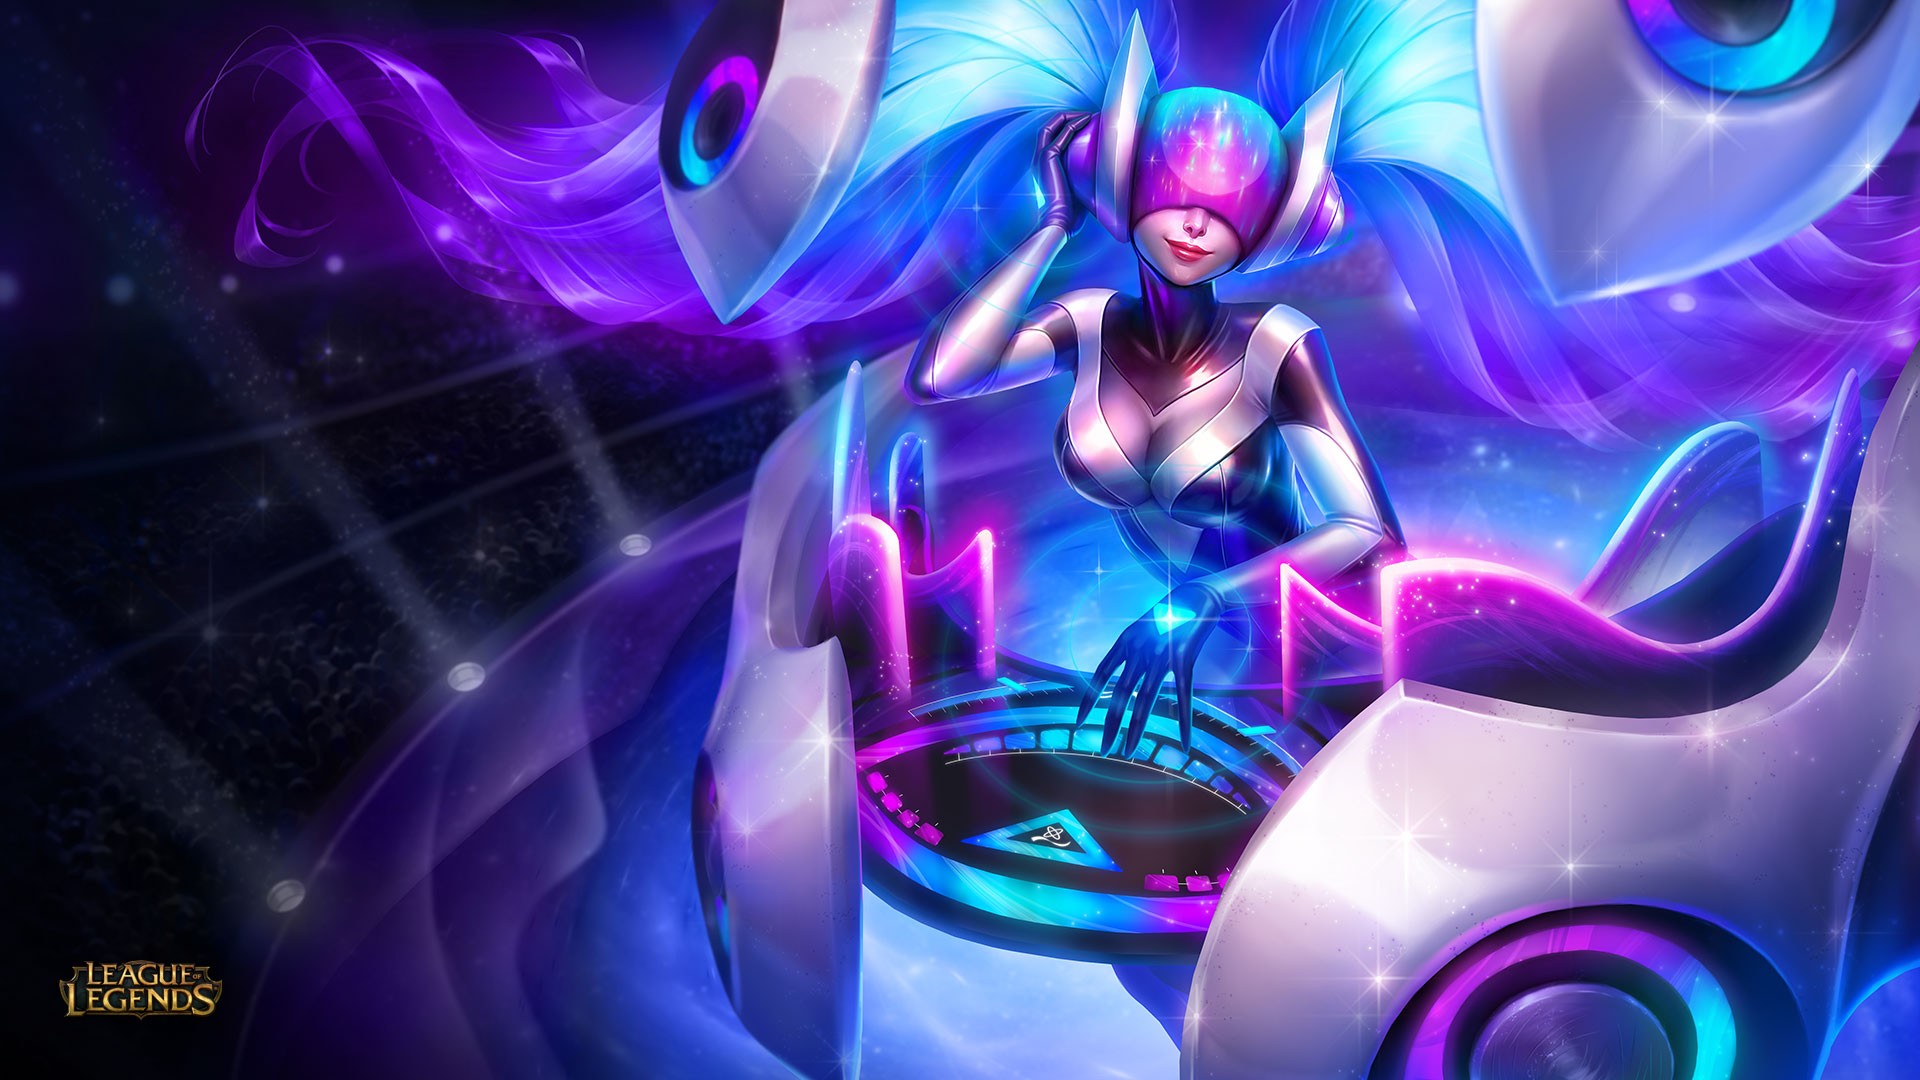 General 1920x1080 League of Legends Sona (League of Legends) fantasy girl boobs PC gaming smiling video game art red lipstick cleavage video game girls